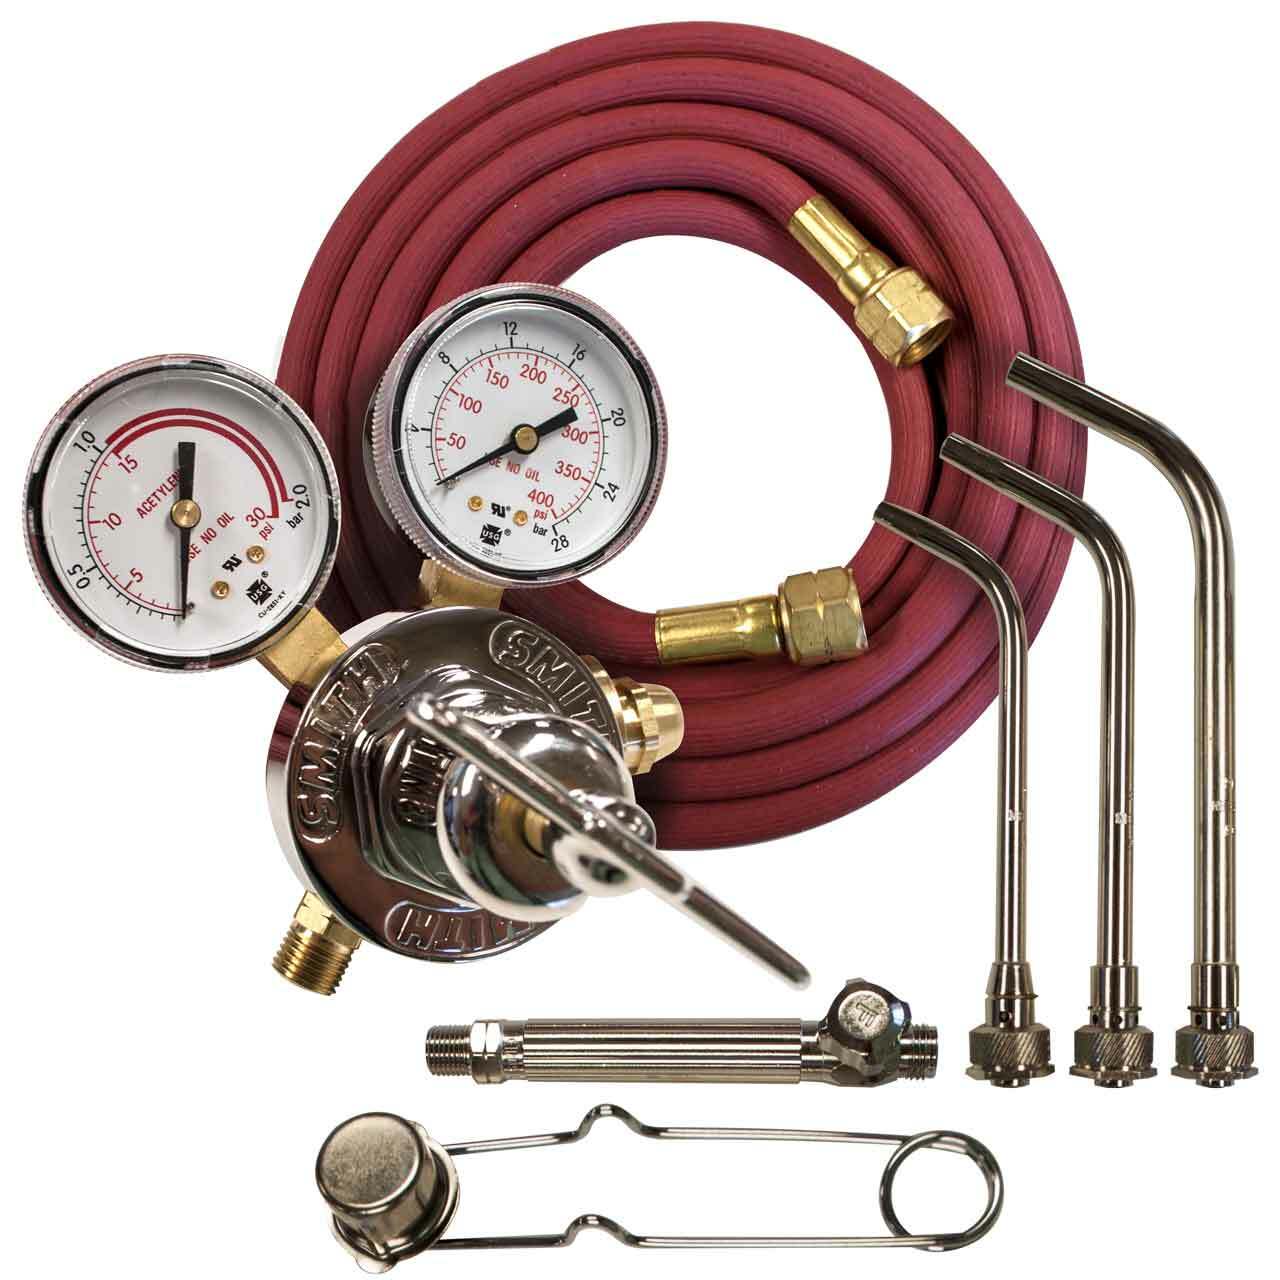 Smith® Silver Smith™ Acetylene and Air Torch Kit with Tank